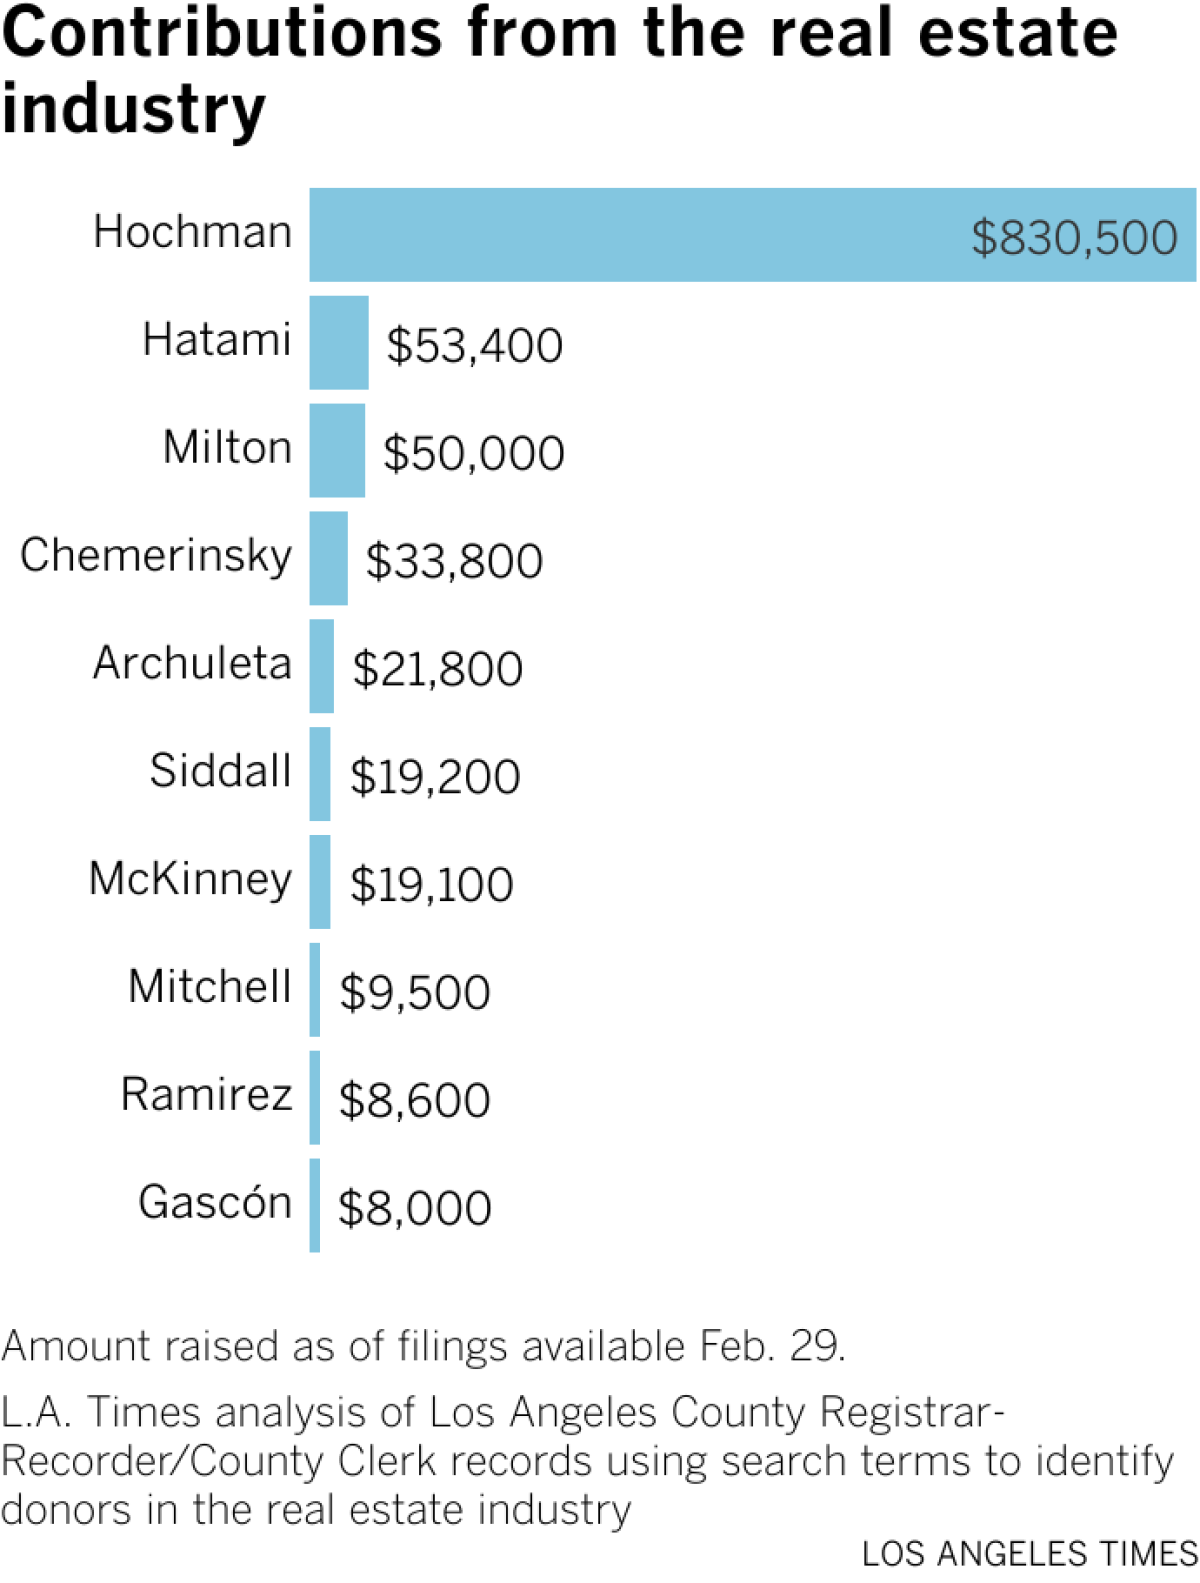 Bar chart showing Hochman has the most contributions from the real estate industry